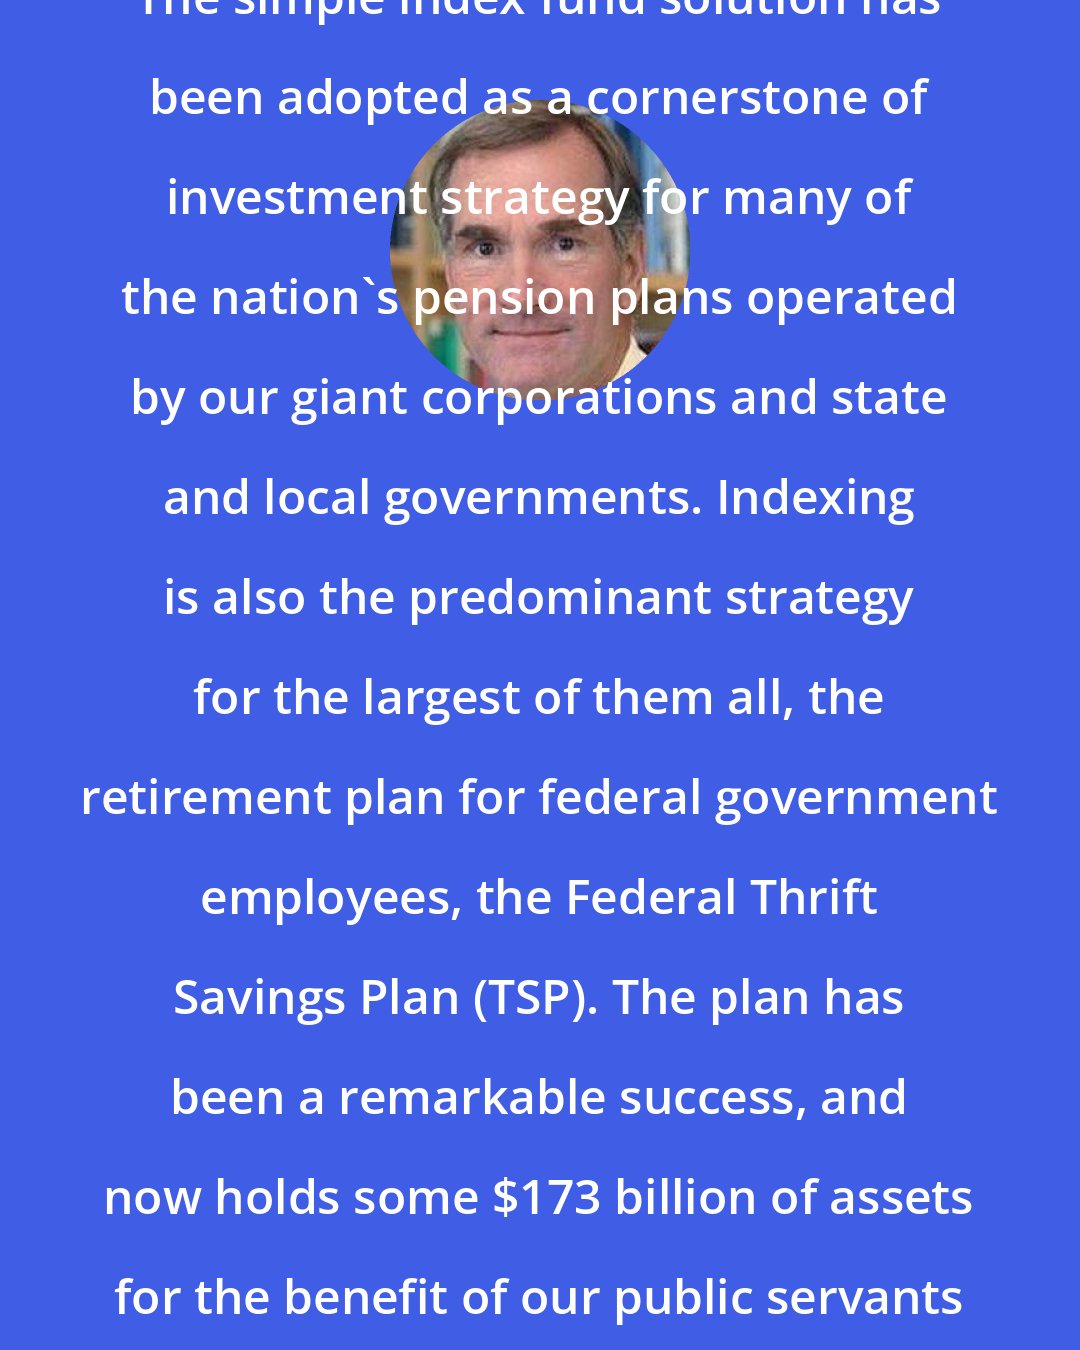 David F. Swensen: The simple index fund solution has been adopted as a cornerstone of investment strategy for many of the nation's pension plans operated by our giant corporations and state and local governments. Indexing is also the predominant strategy for the largest of them all, the retirement plan for federal government employees, the Federal Thrift Savings Plan (TSP). The plan has been a remarkable success, and now holds some $173 billion of assets for the benefit of our public servants and members of armed services.